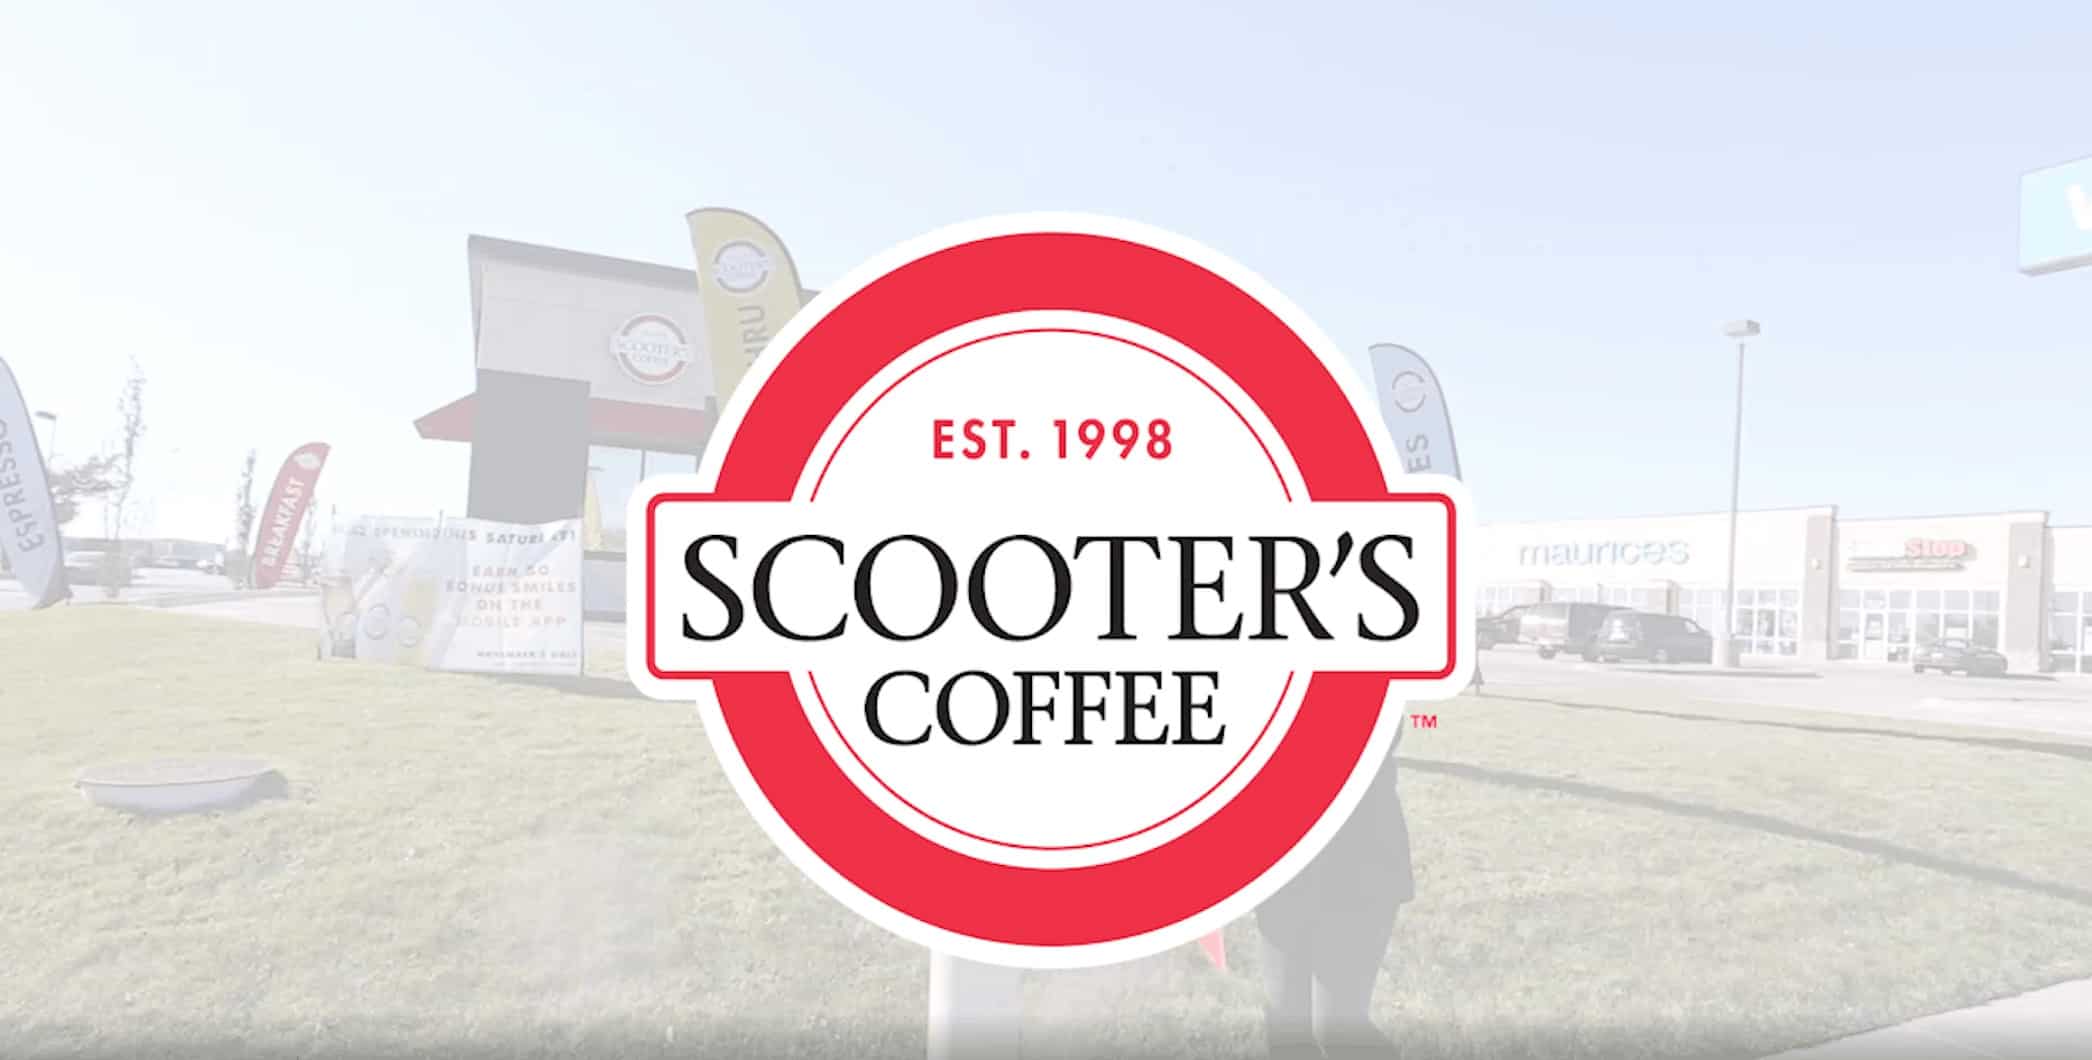 An image of a Scooters Kiosk with a white transparent cover over it, and then the Scooter's Coffee Logo Prominent in the center.